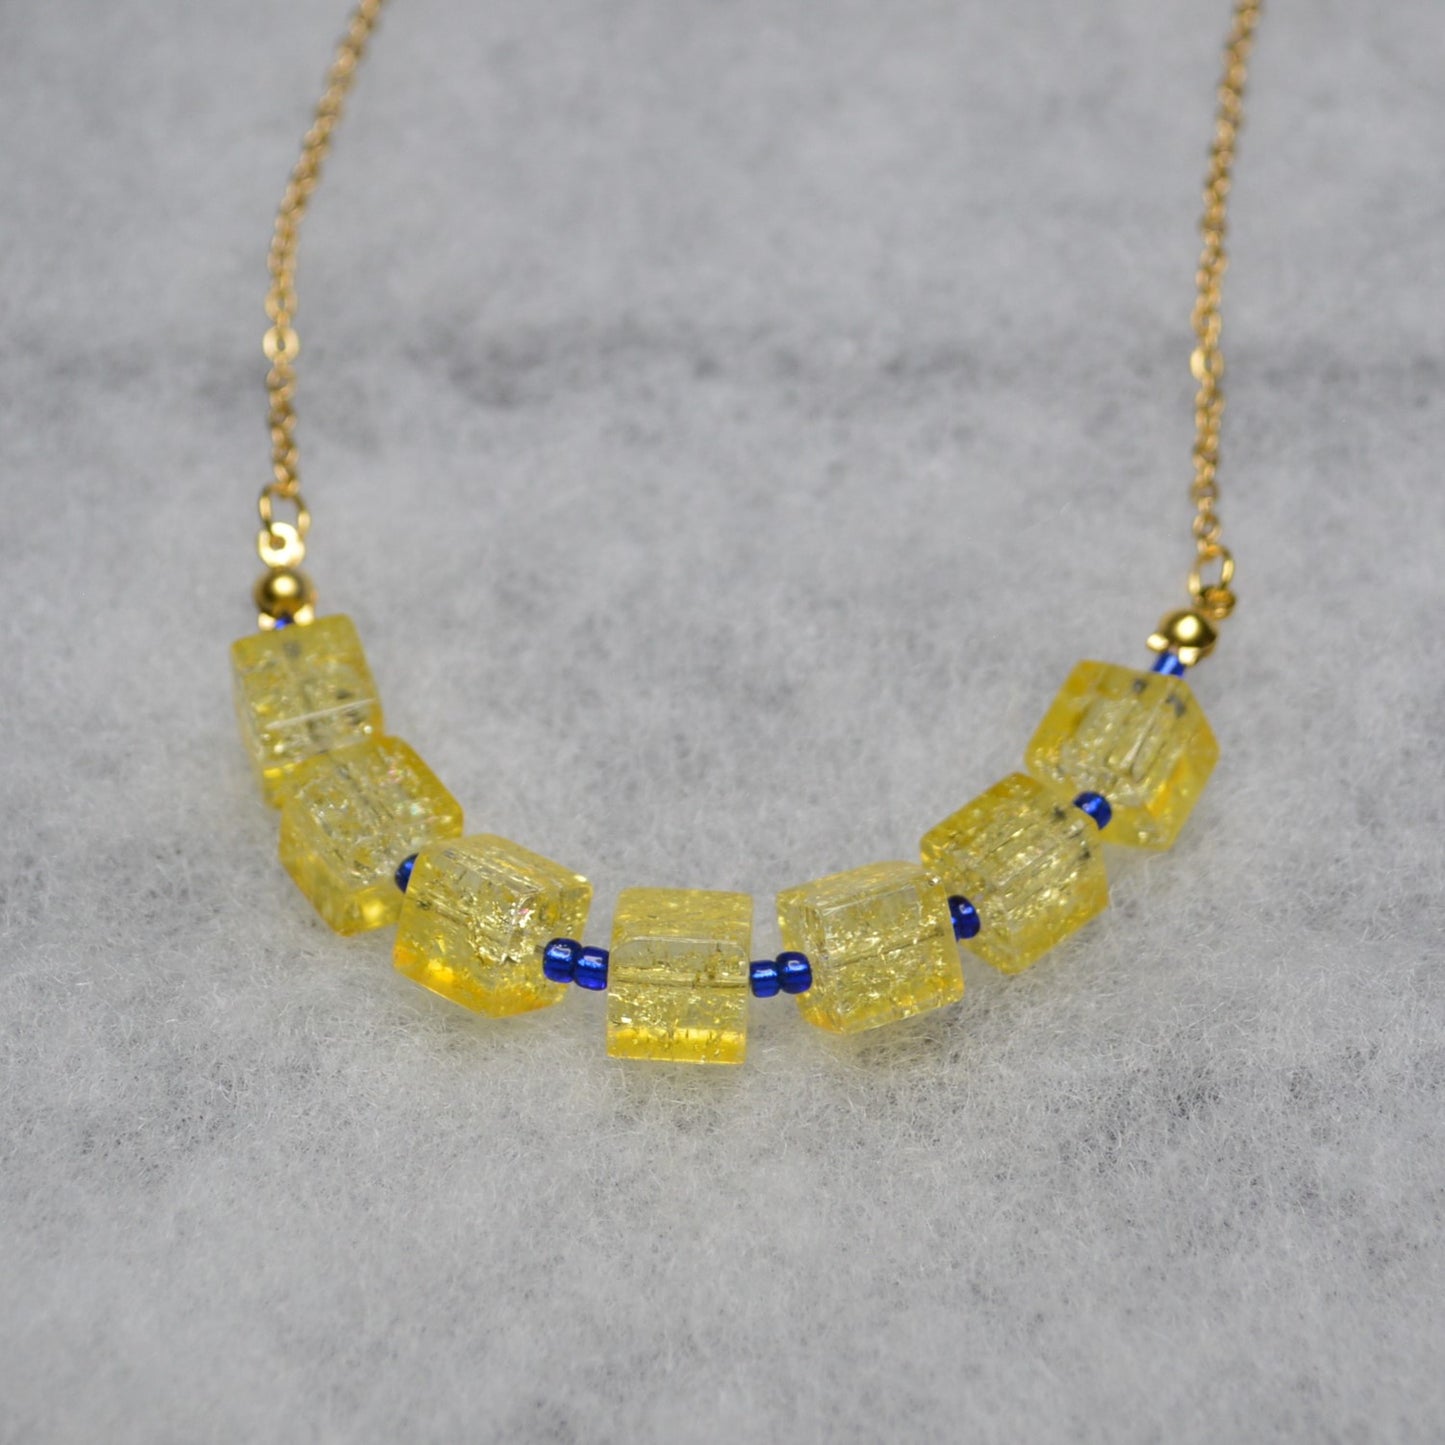 Yellow Crackled Glass Necklace with Blue Seed Beads